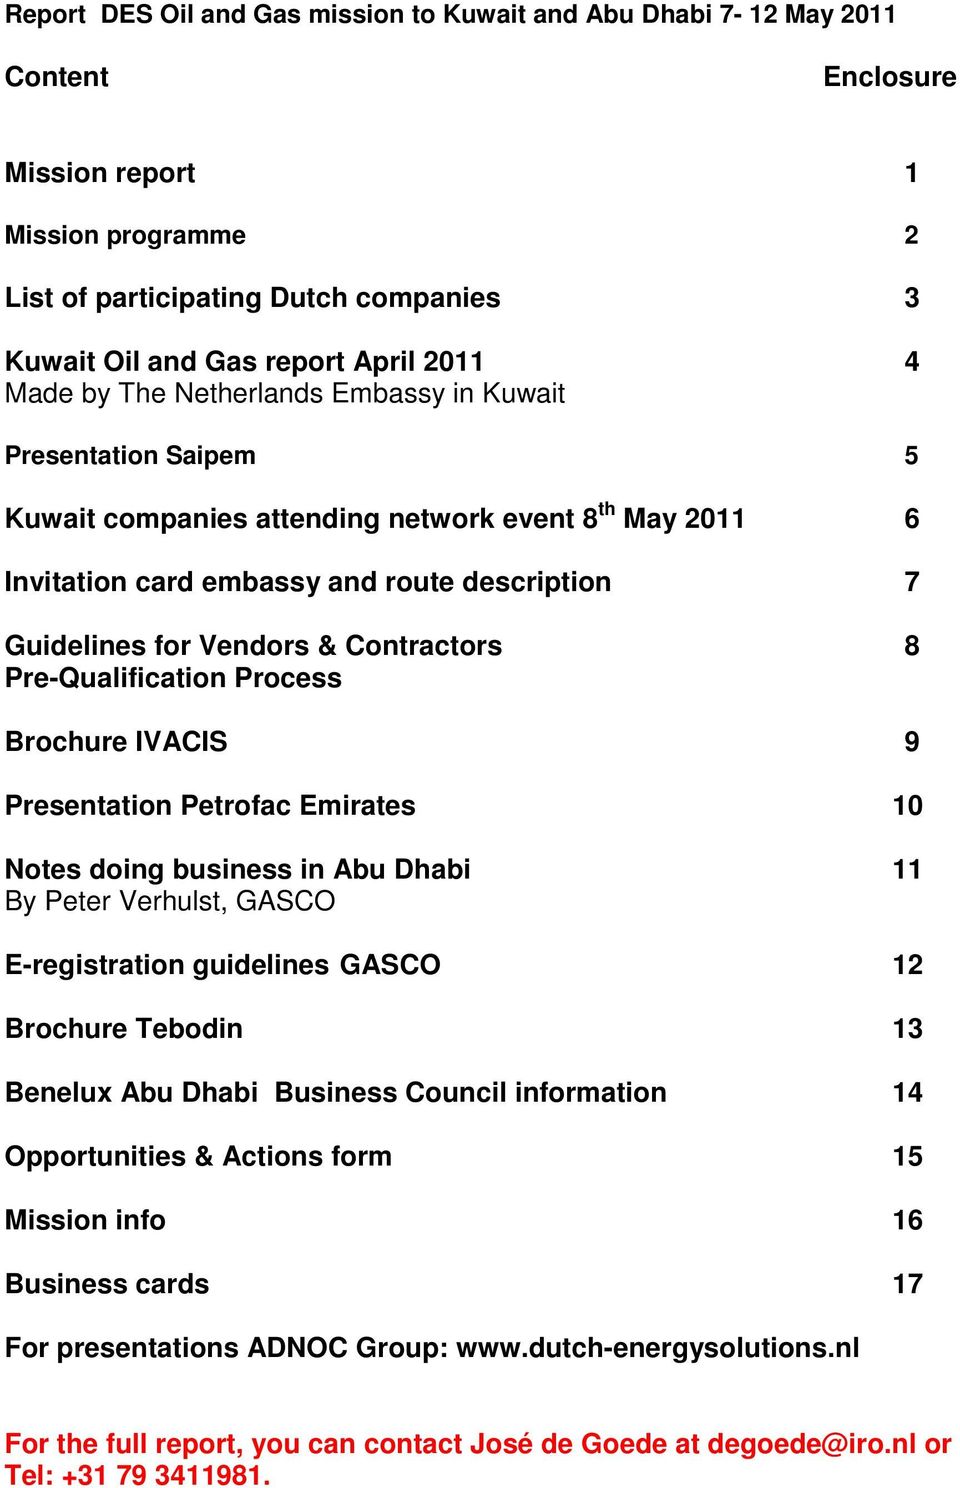 & Contractors 8 Pre-Qualification Process Brochure IVACIS 9 Presentation Petrofac Emirates 10 Notes doing business in Abu Dhabi 11 By Peter Verhulst, GASCO E-registration guidelines GASCO 12 Brochure